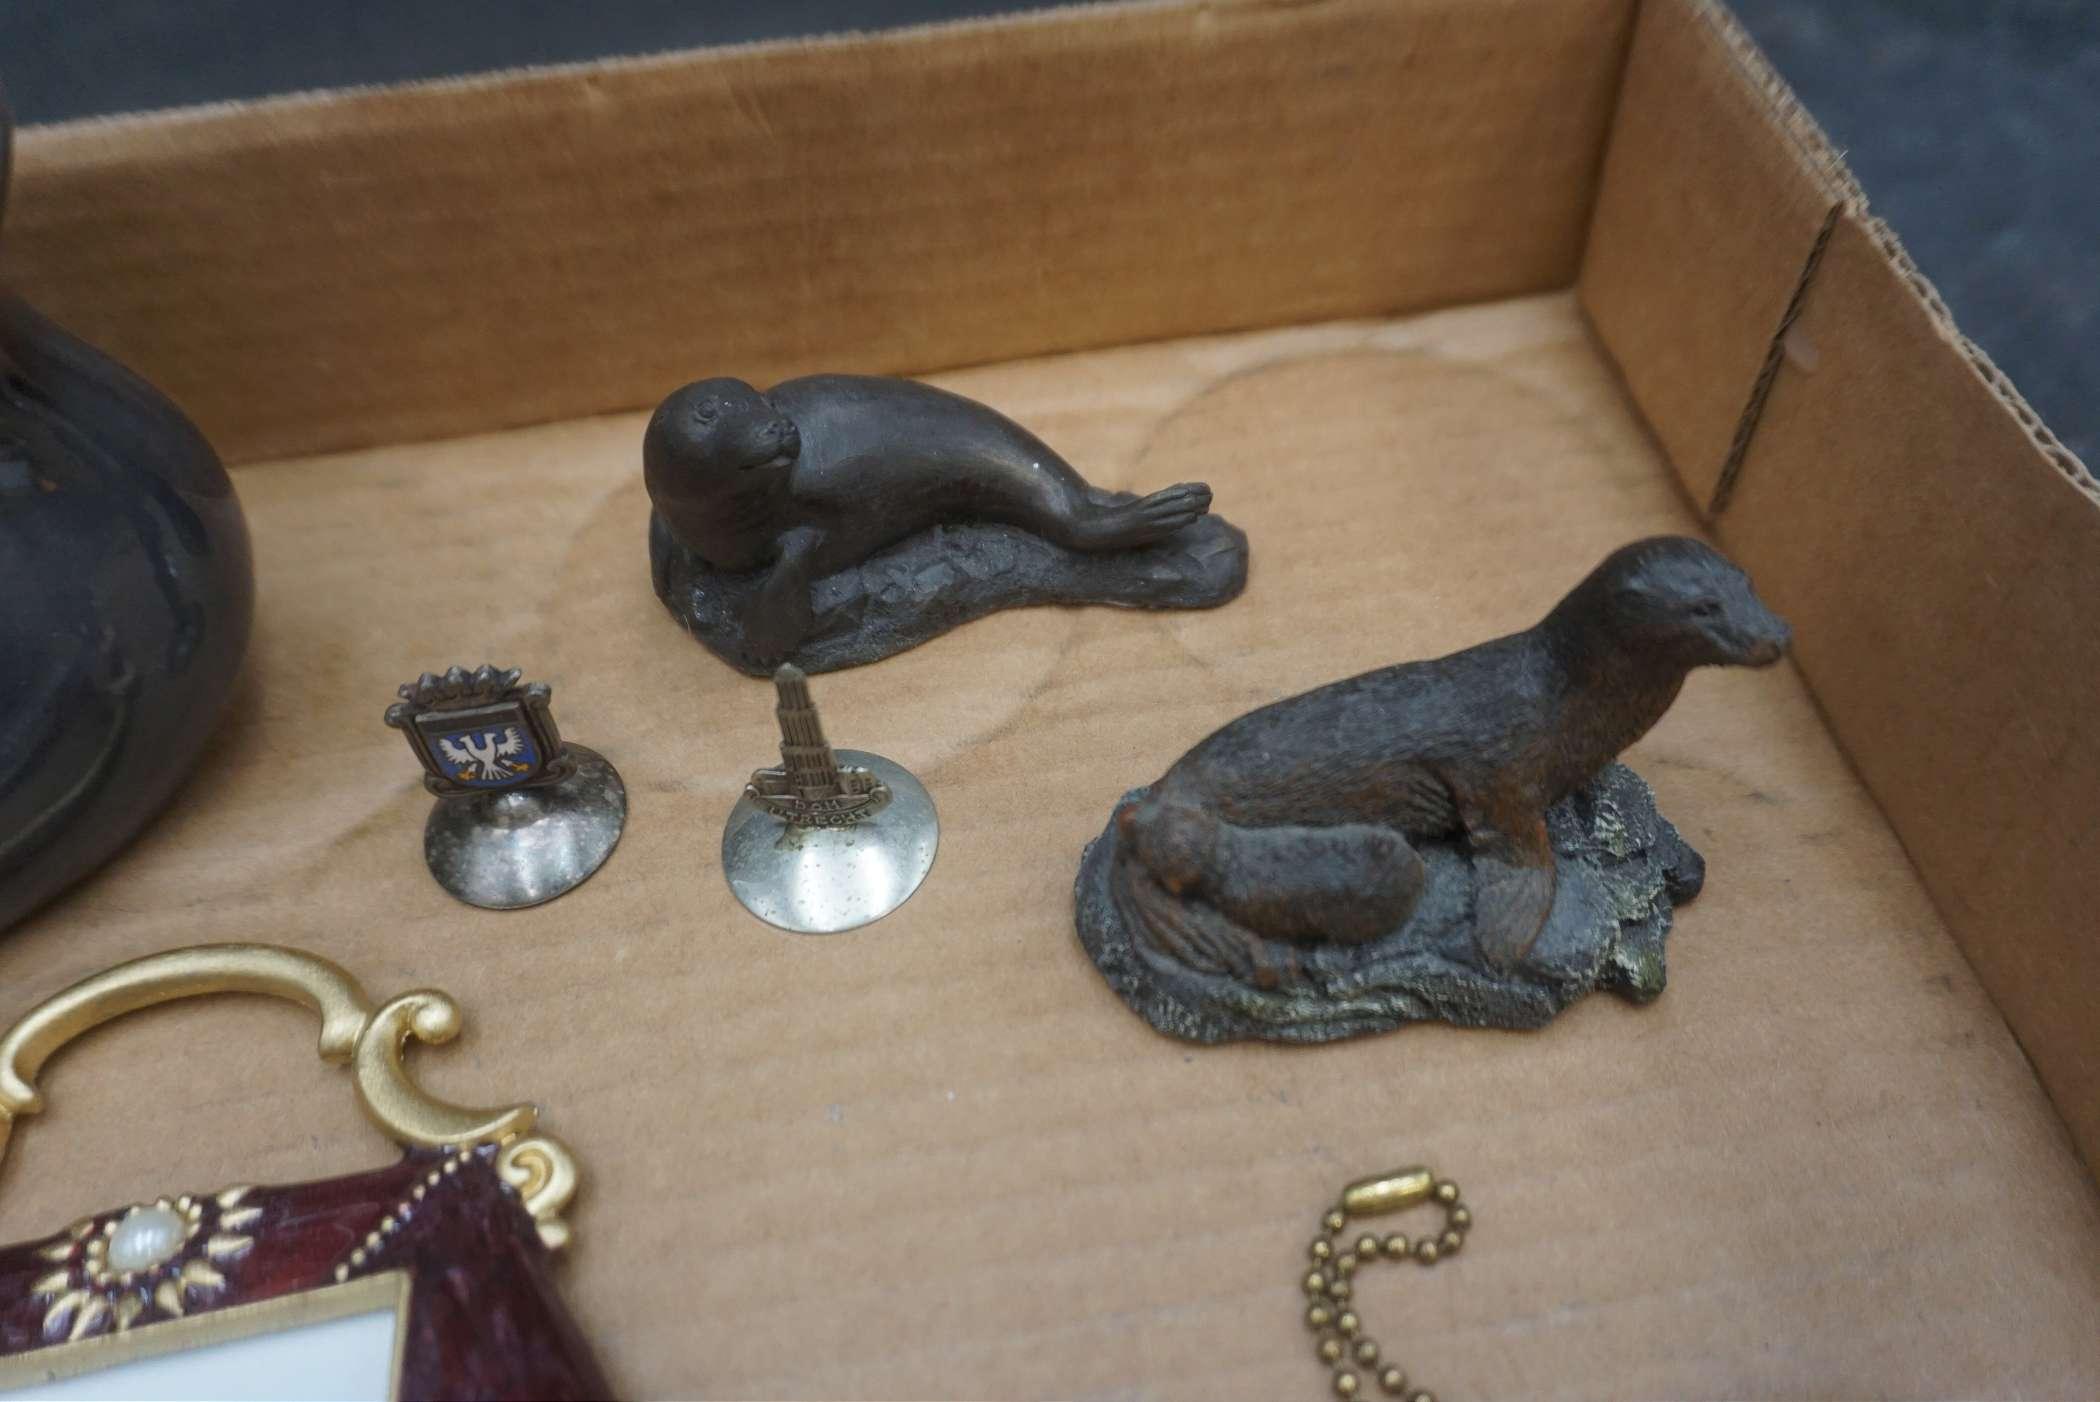 Seal FIgurines, Whale Sculpture, Purse Picture Frame & Other